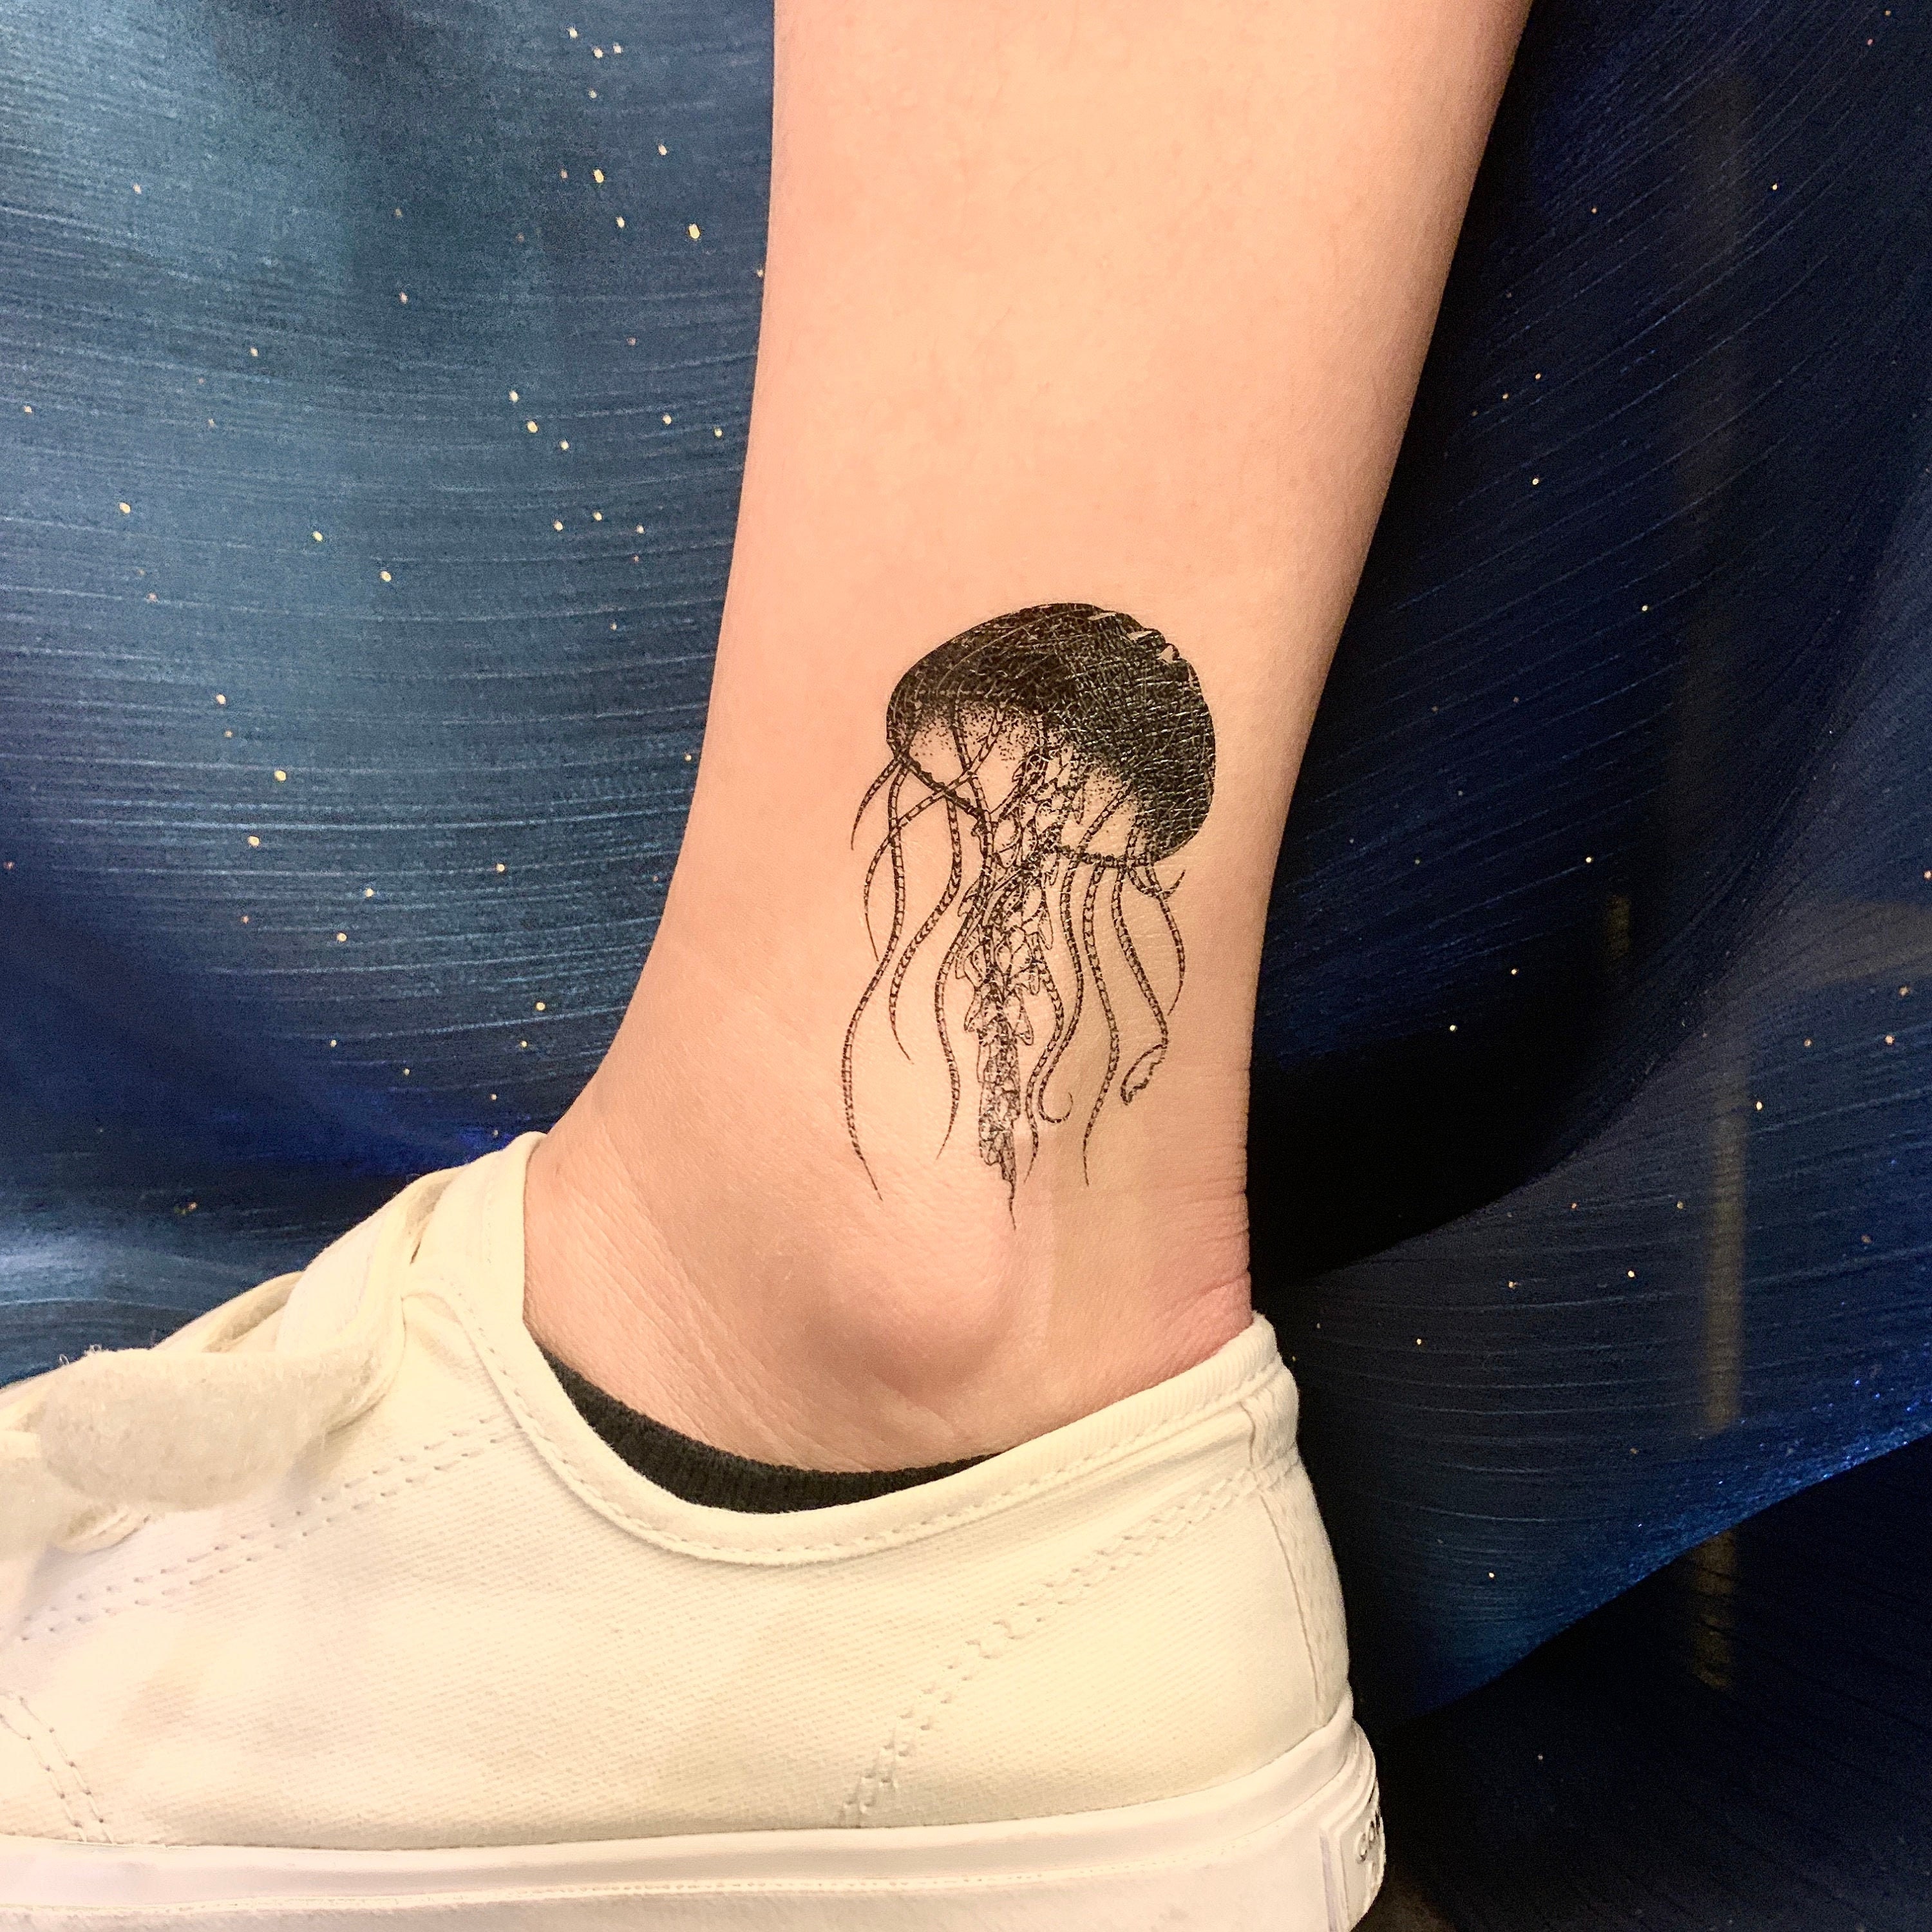 What Does A Jelly Fish Tattoo Mean | TikTok